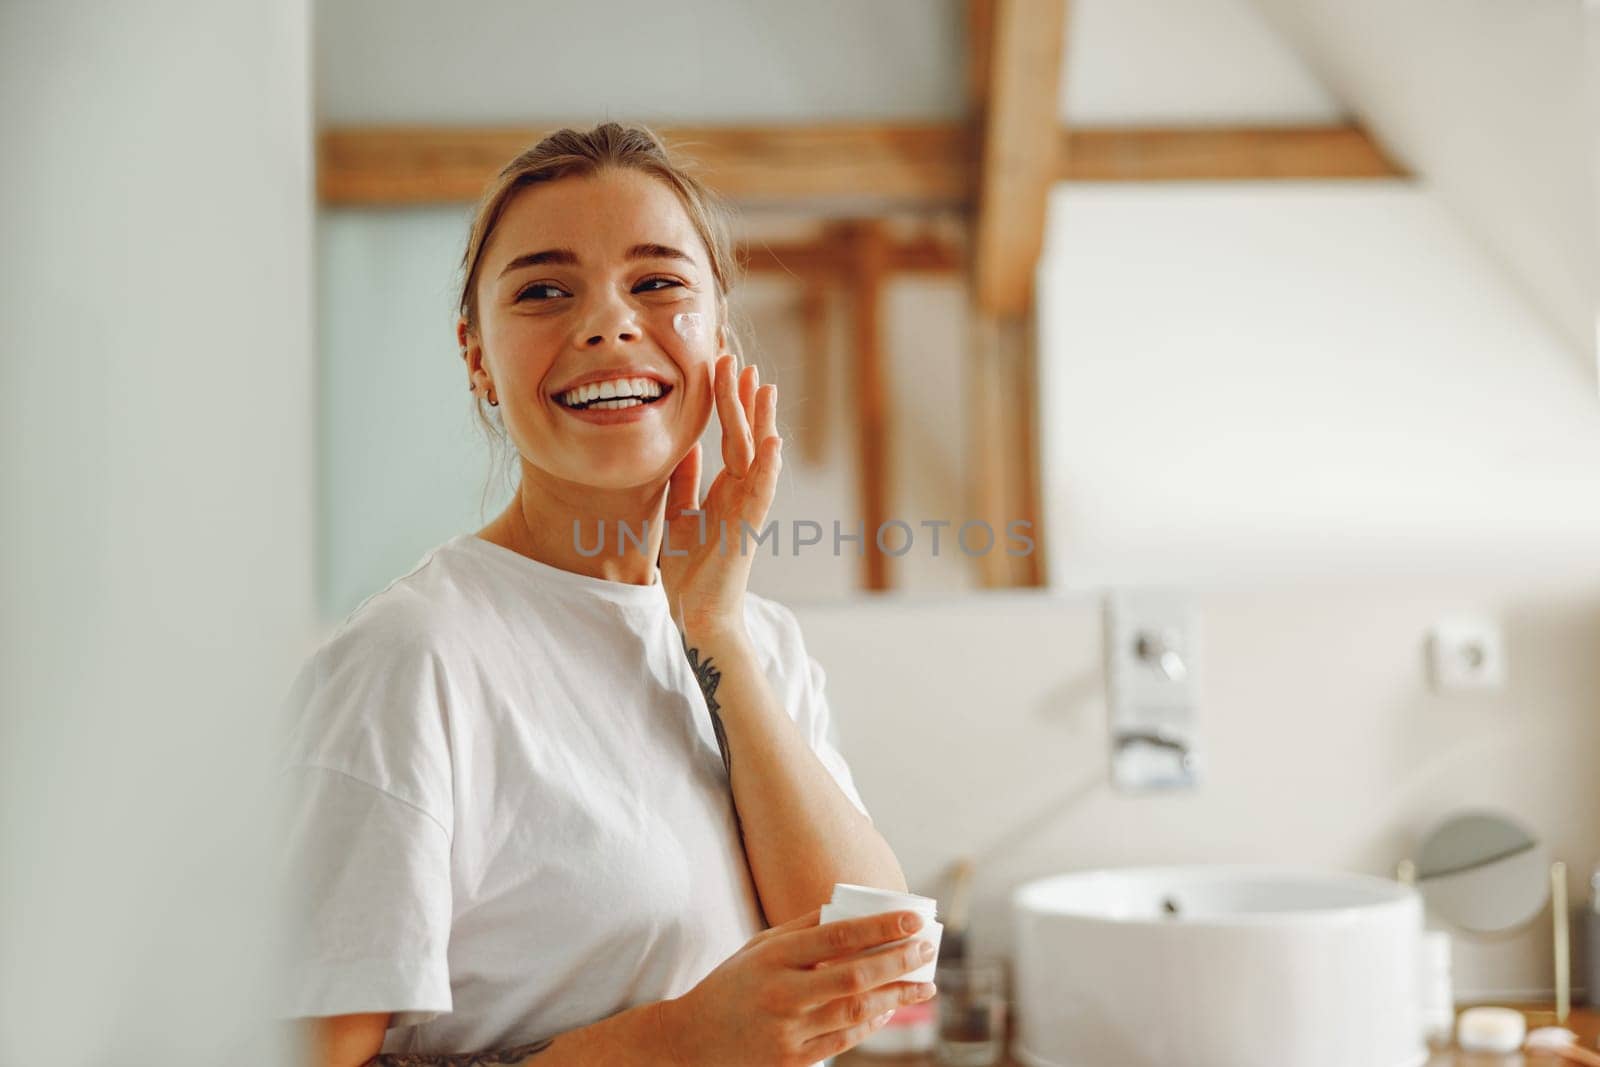 Smiling woman applying hydrating moisturizer on her face sitting in bathroom. Home beauty routine by Yaroslav_astakhov